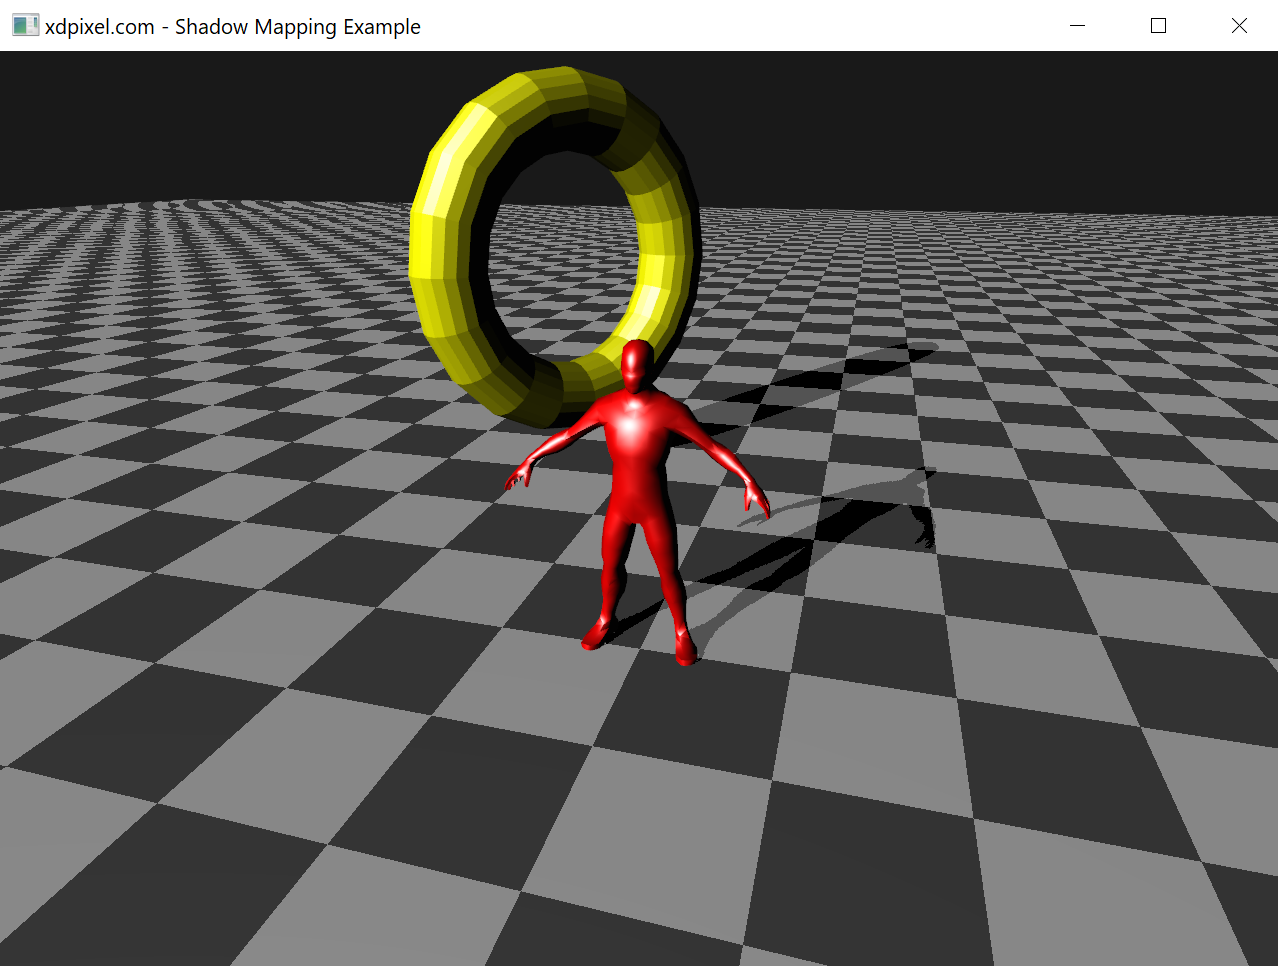 OpenGL Shadow Mapping Example